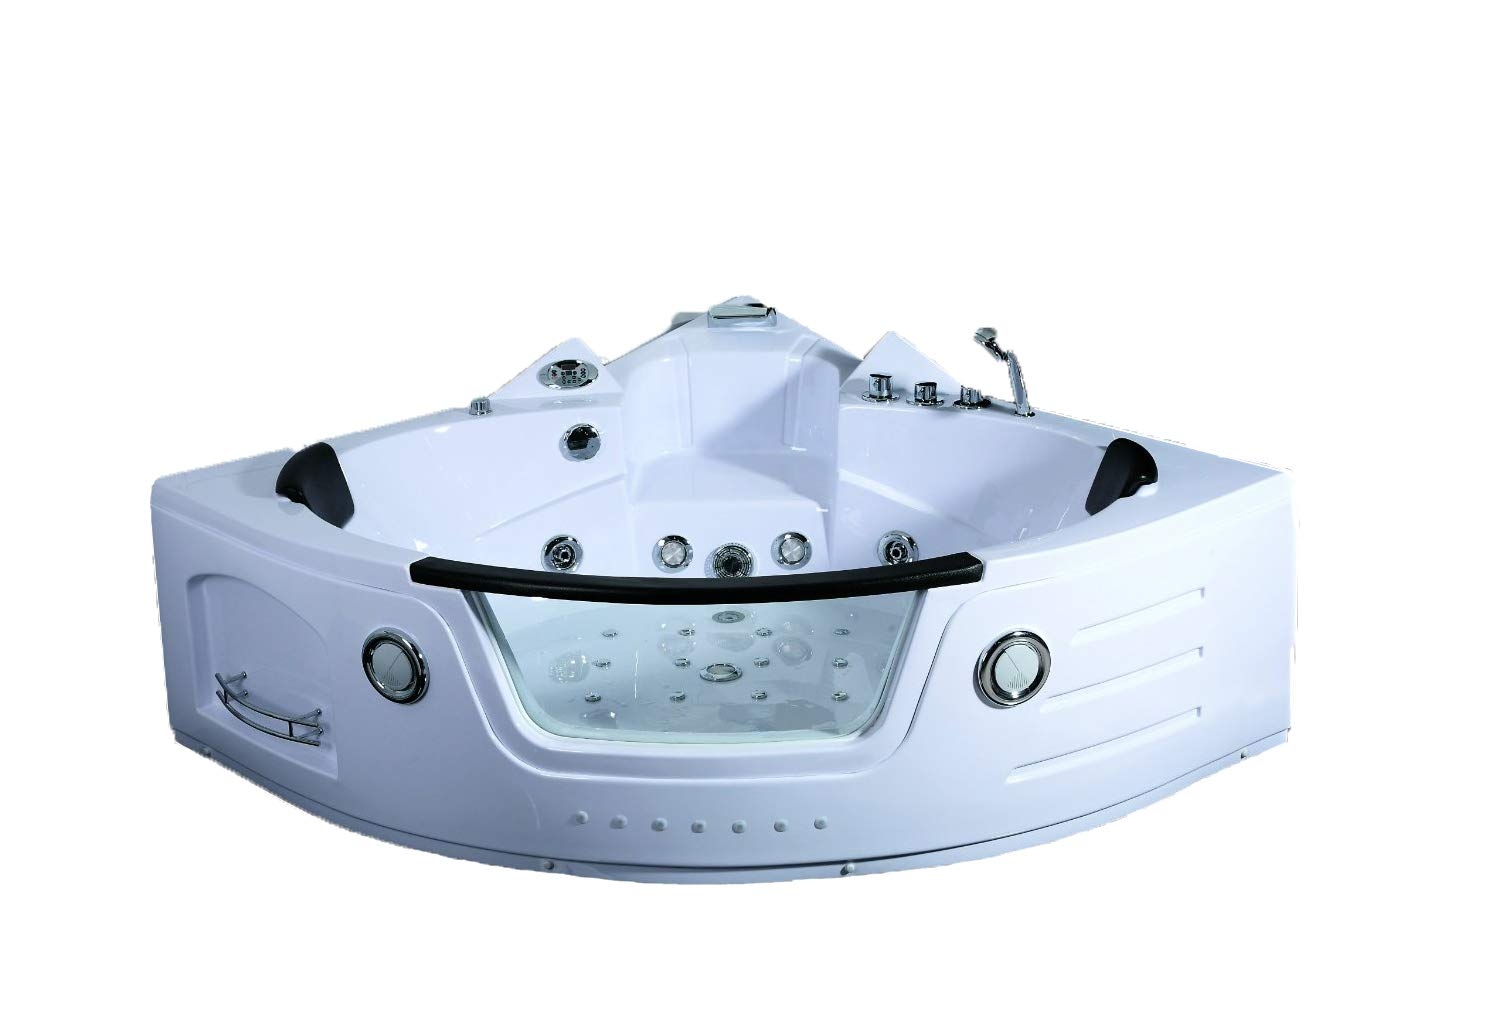 2 Person Indoor Whirlpool Jetted Bath Tub Spa Hydrotherapy Massage Bathtub 051A White w/ Bluetooth